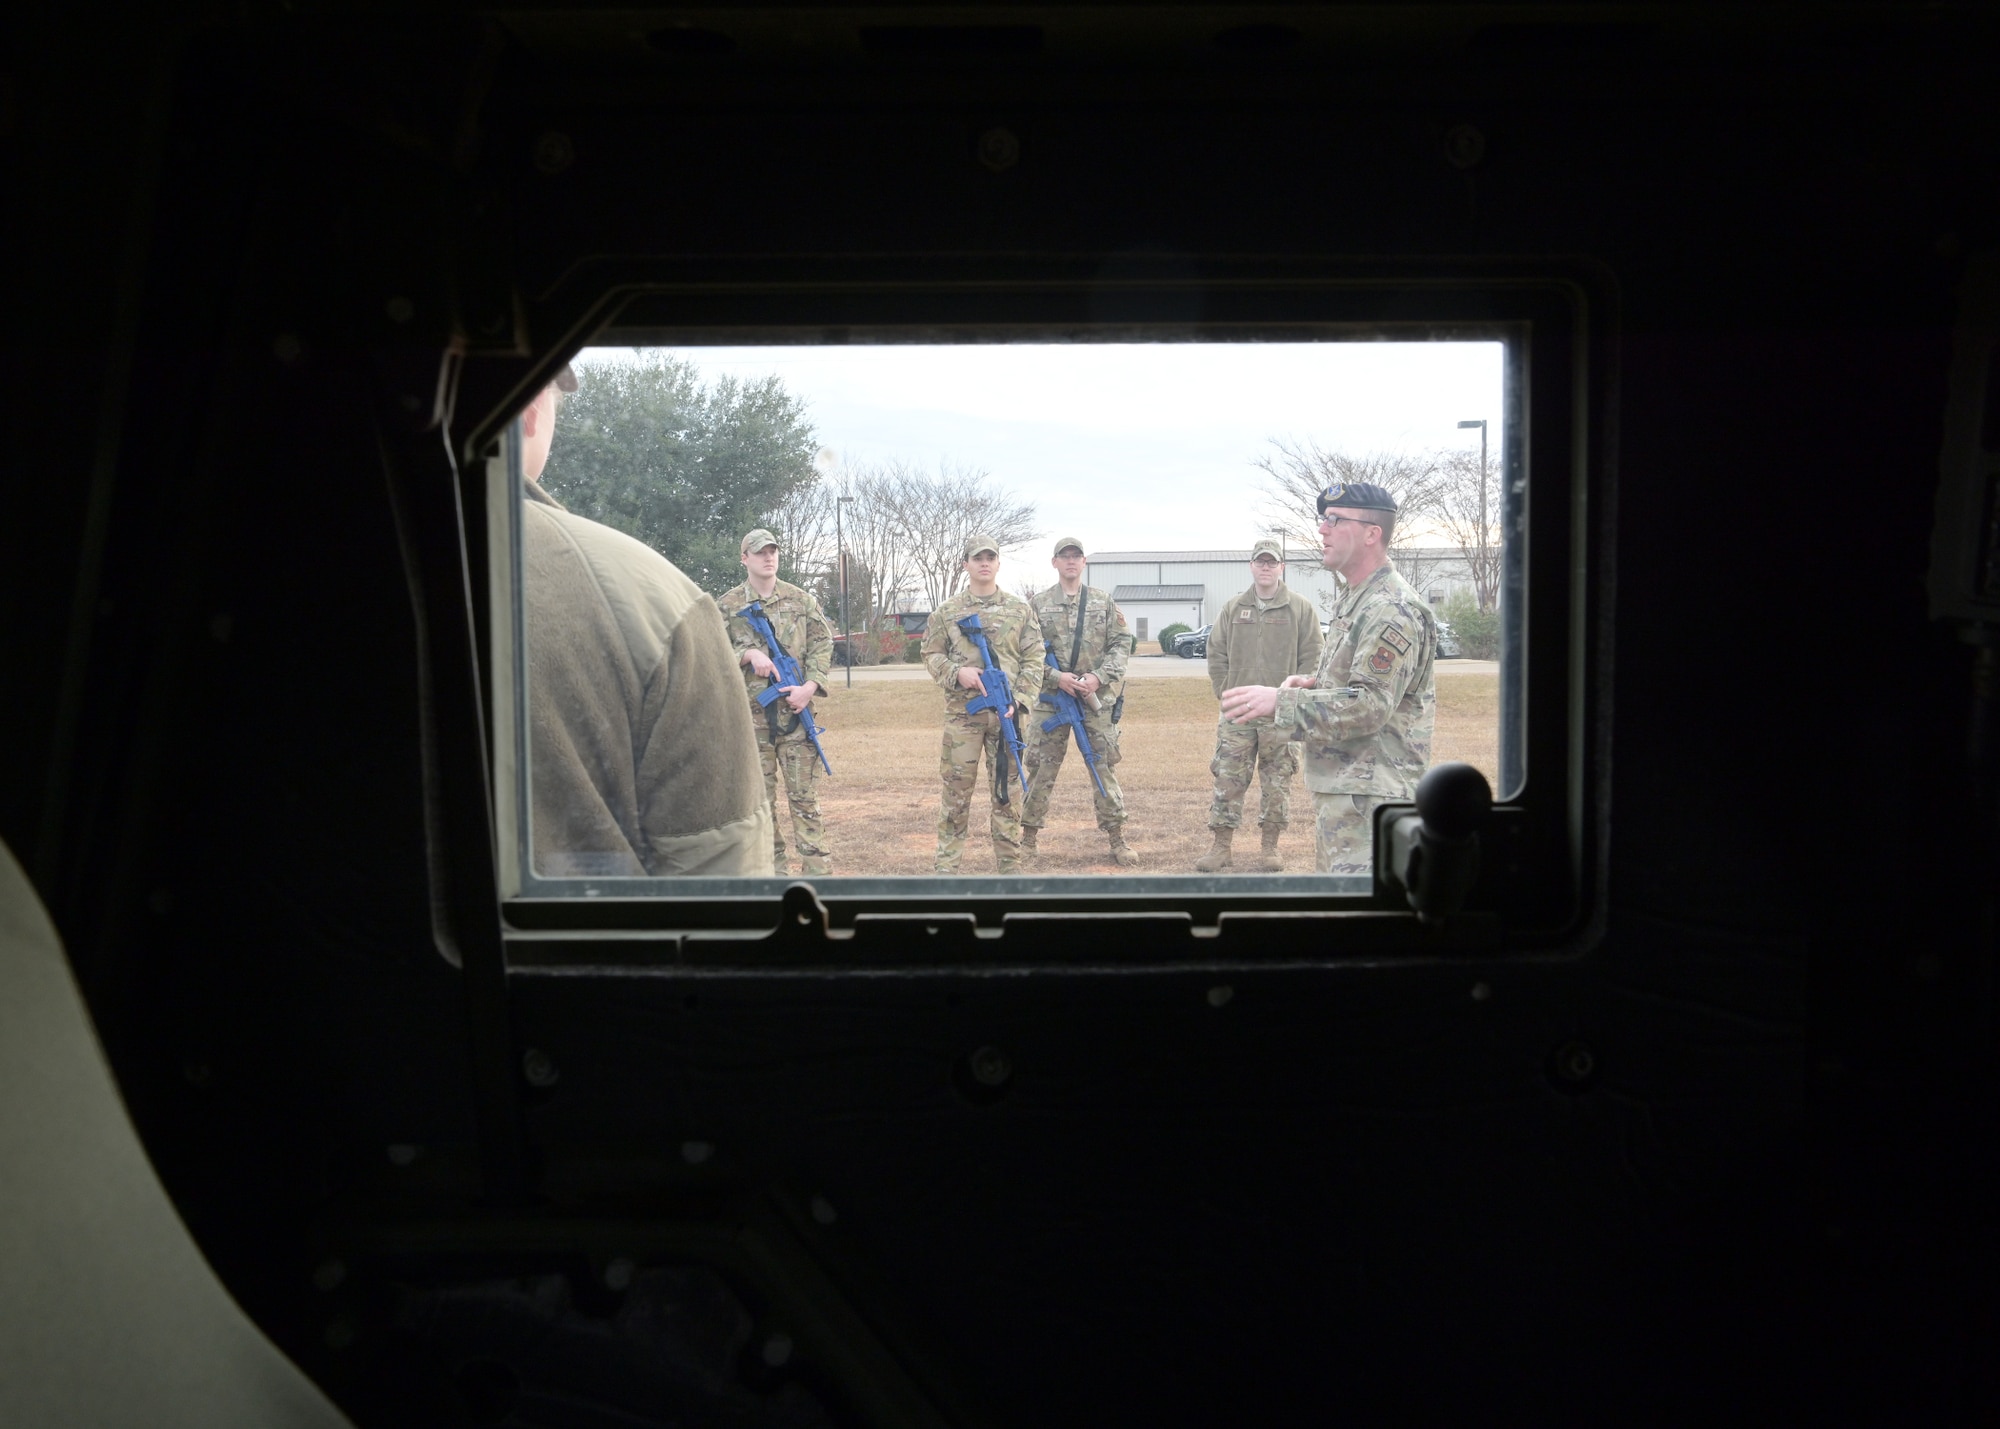 A group of Airmen are seen through the window of a vehicle.